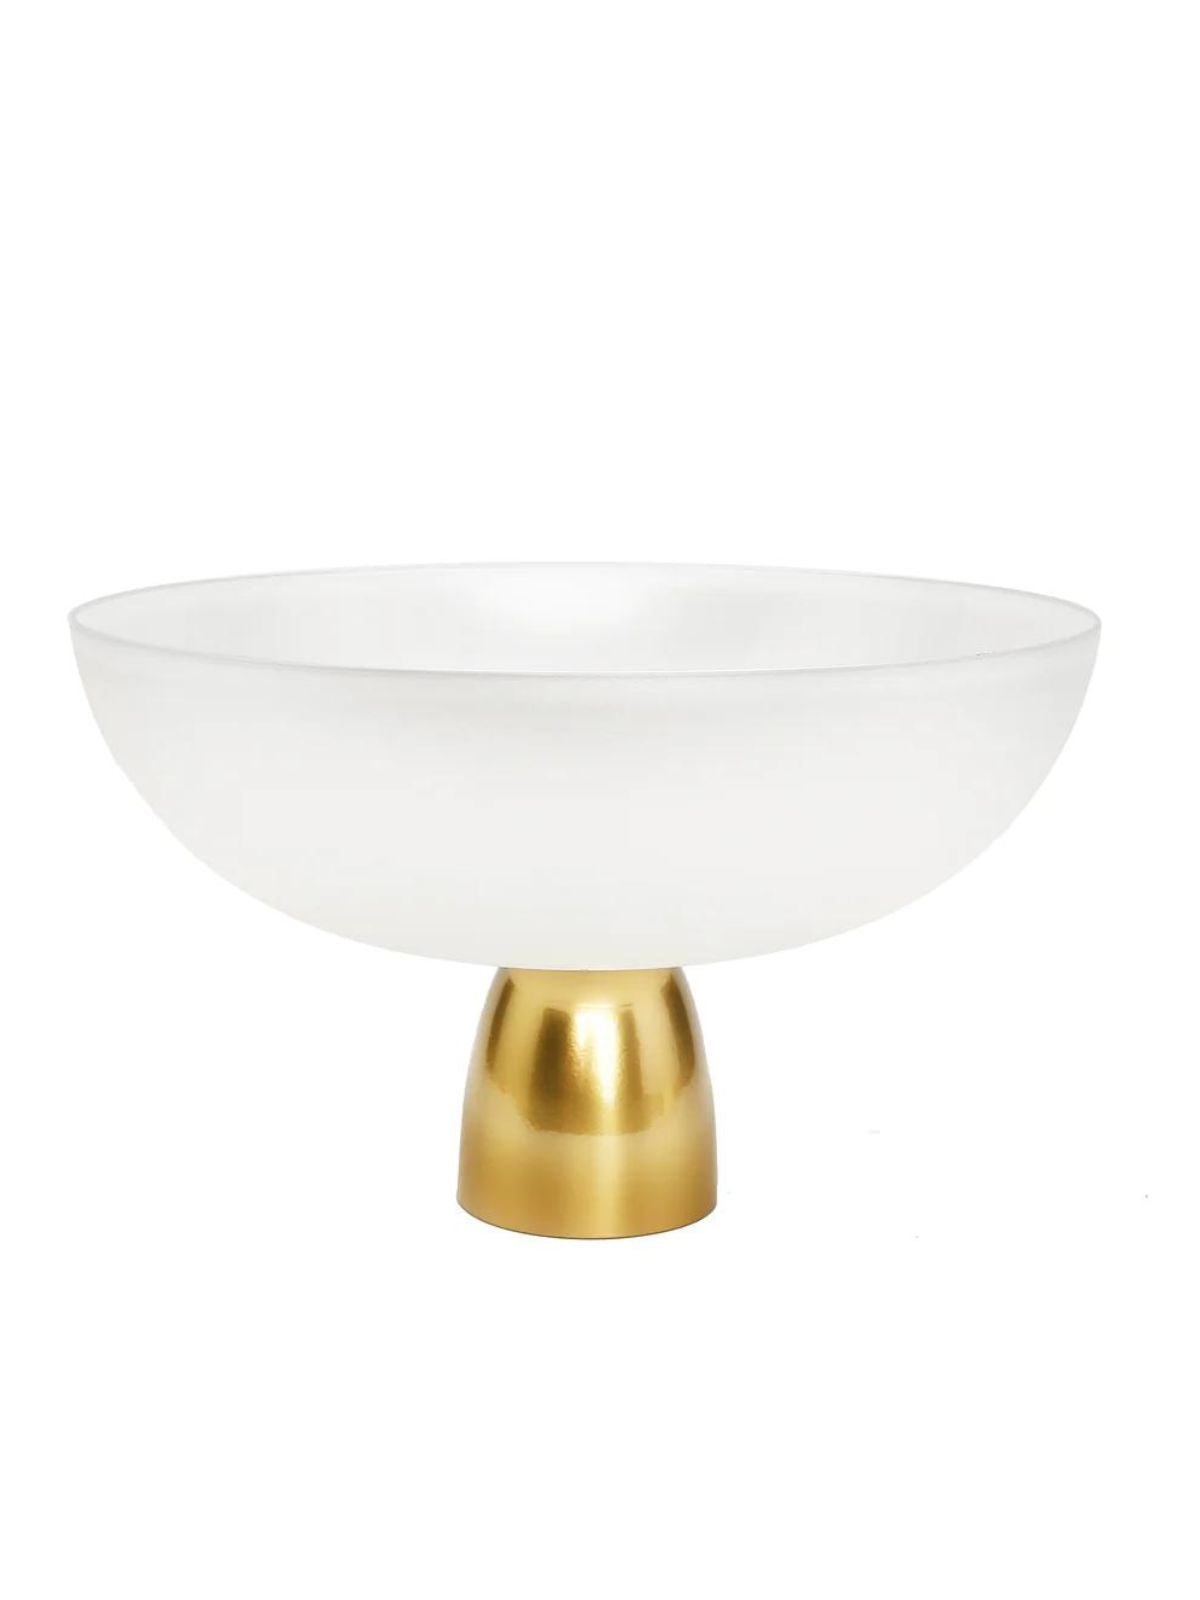 White Glass Bowl on Gold Base, Measures 11D x 7H